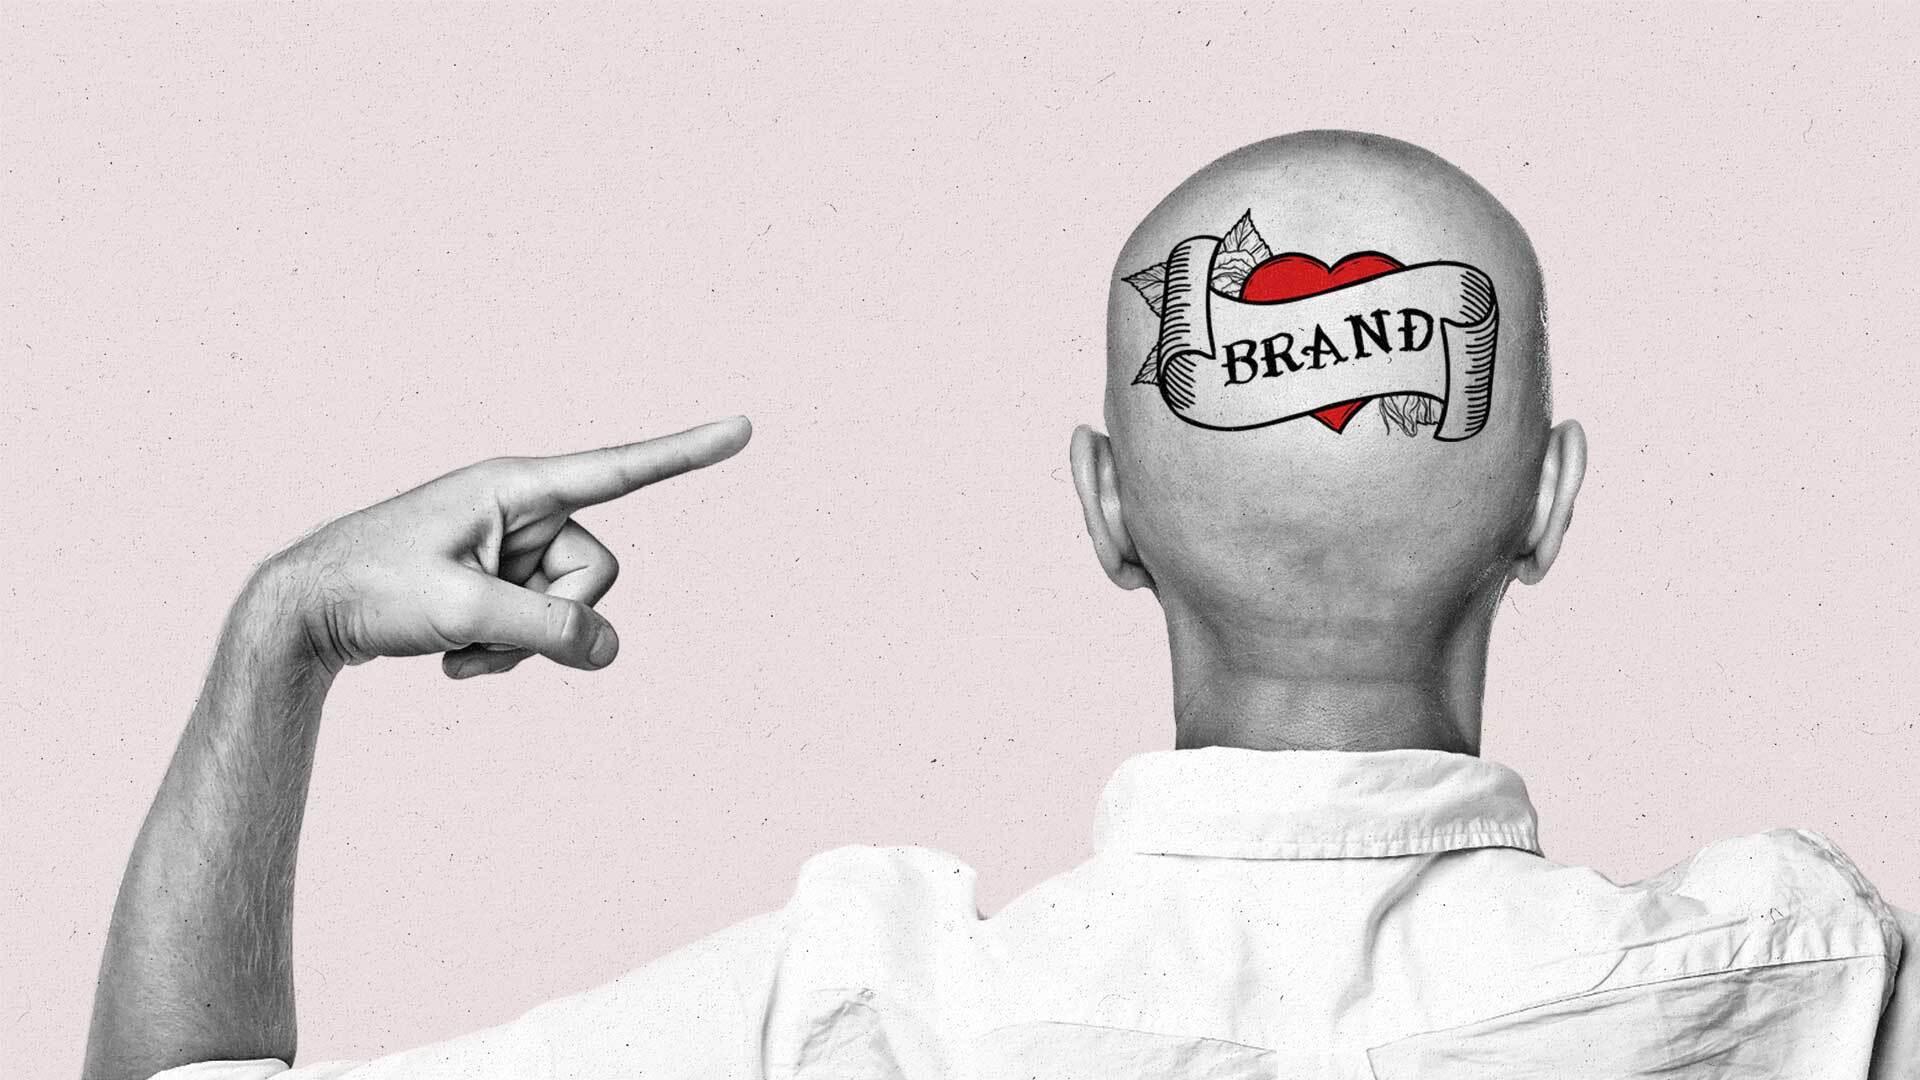 A bald man points at the "Brand" tattoo on the back of his head.